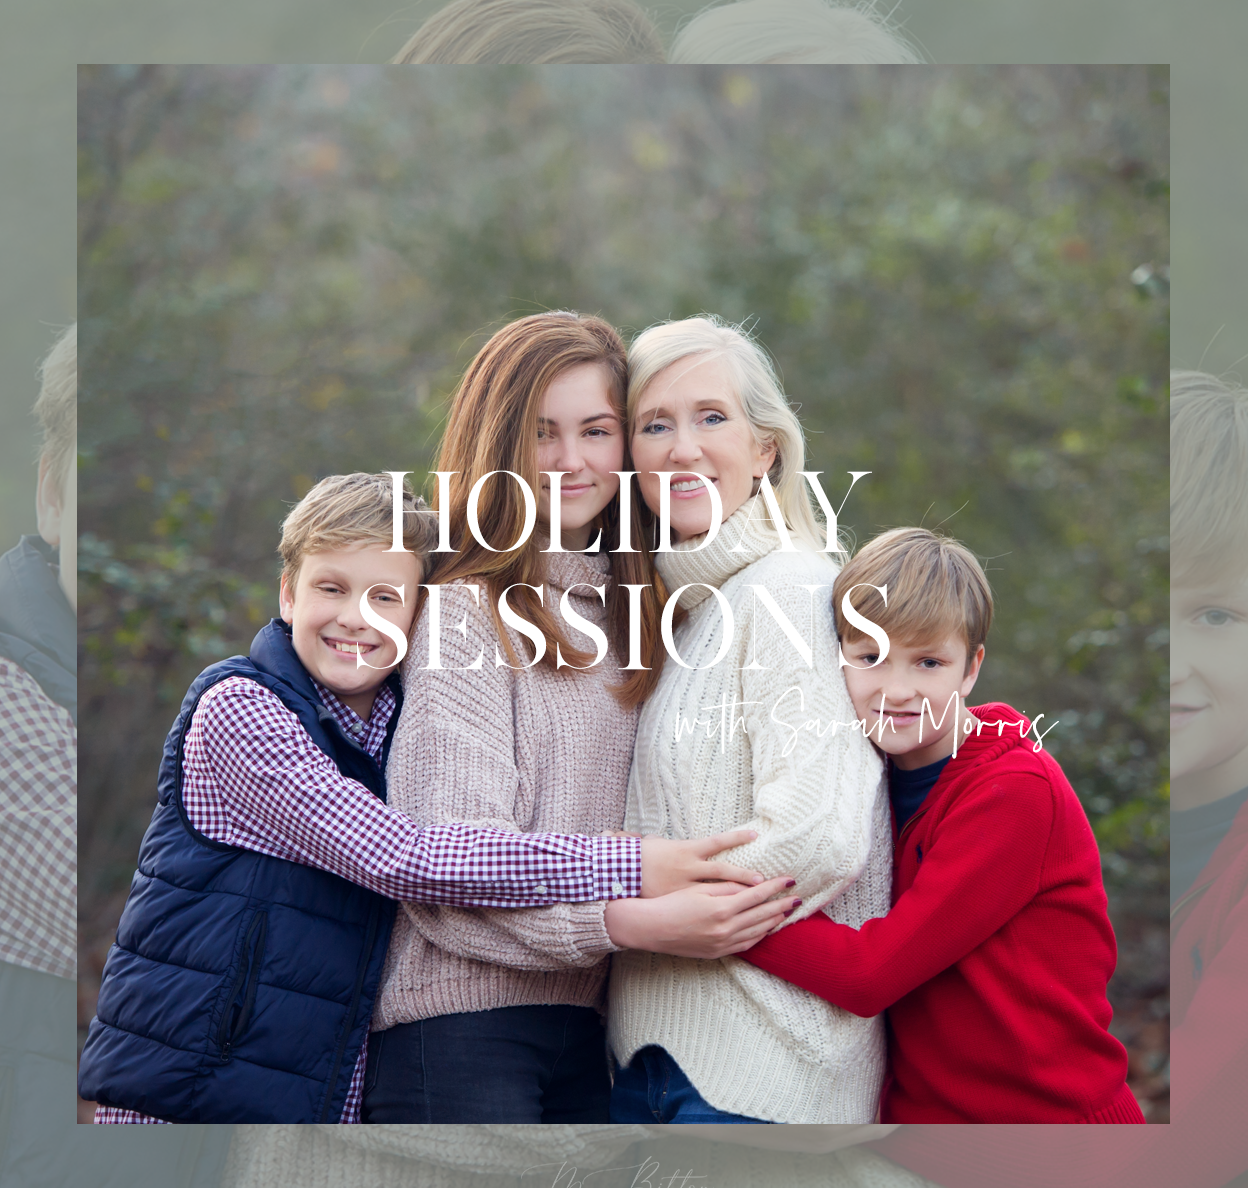 Holiday Sessions with Sarah Morris - November 3rd - Meg Bitton Productions